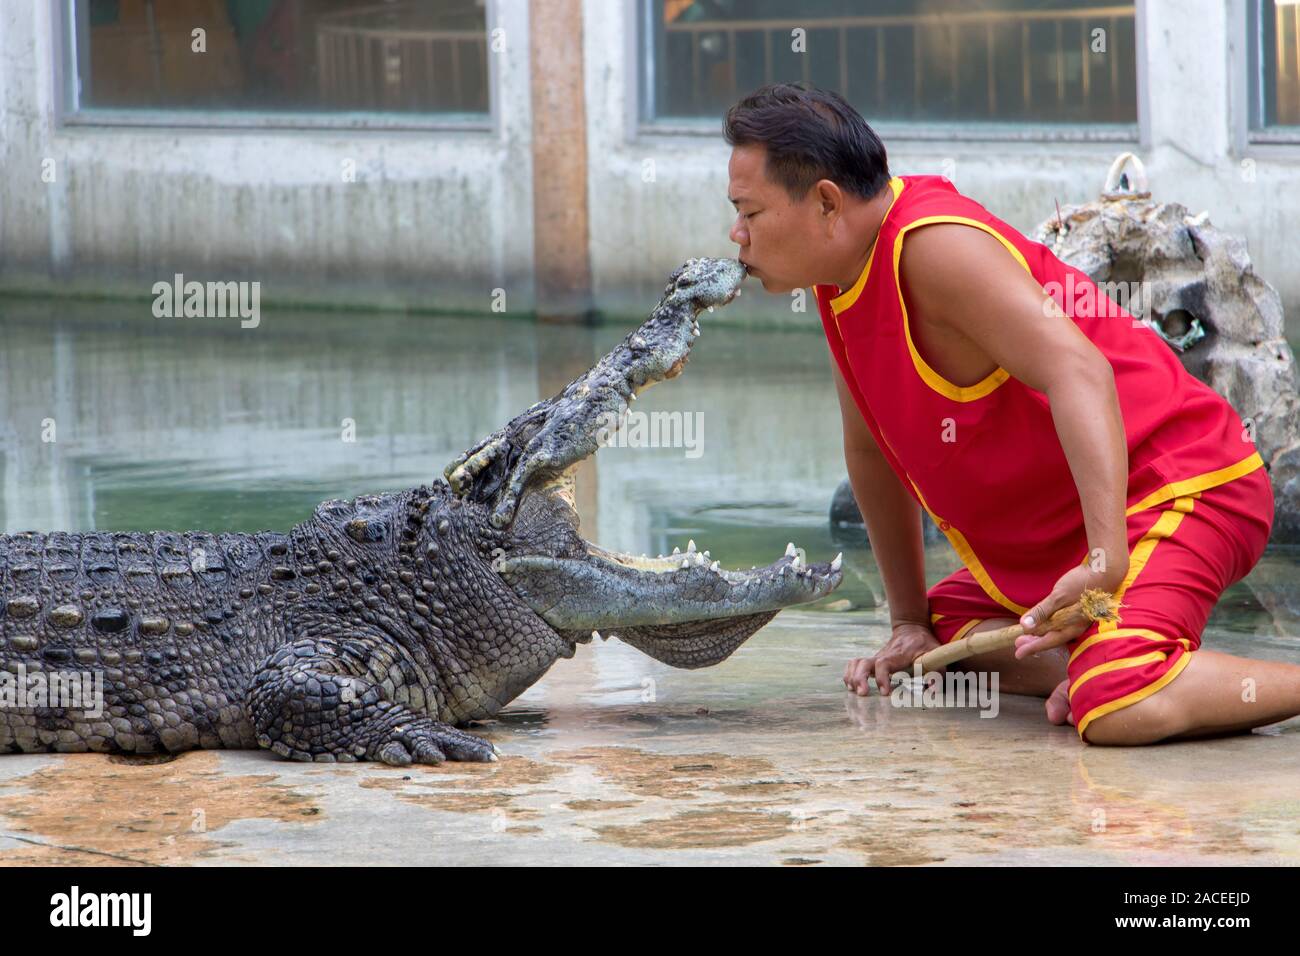 SAMUT PRAKAN, THAILAND, MAY 18 2019, Dangerous performance with wild animals. The tamer kisses the crocodile snout. Stock Photo